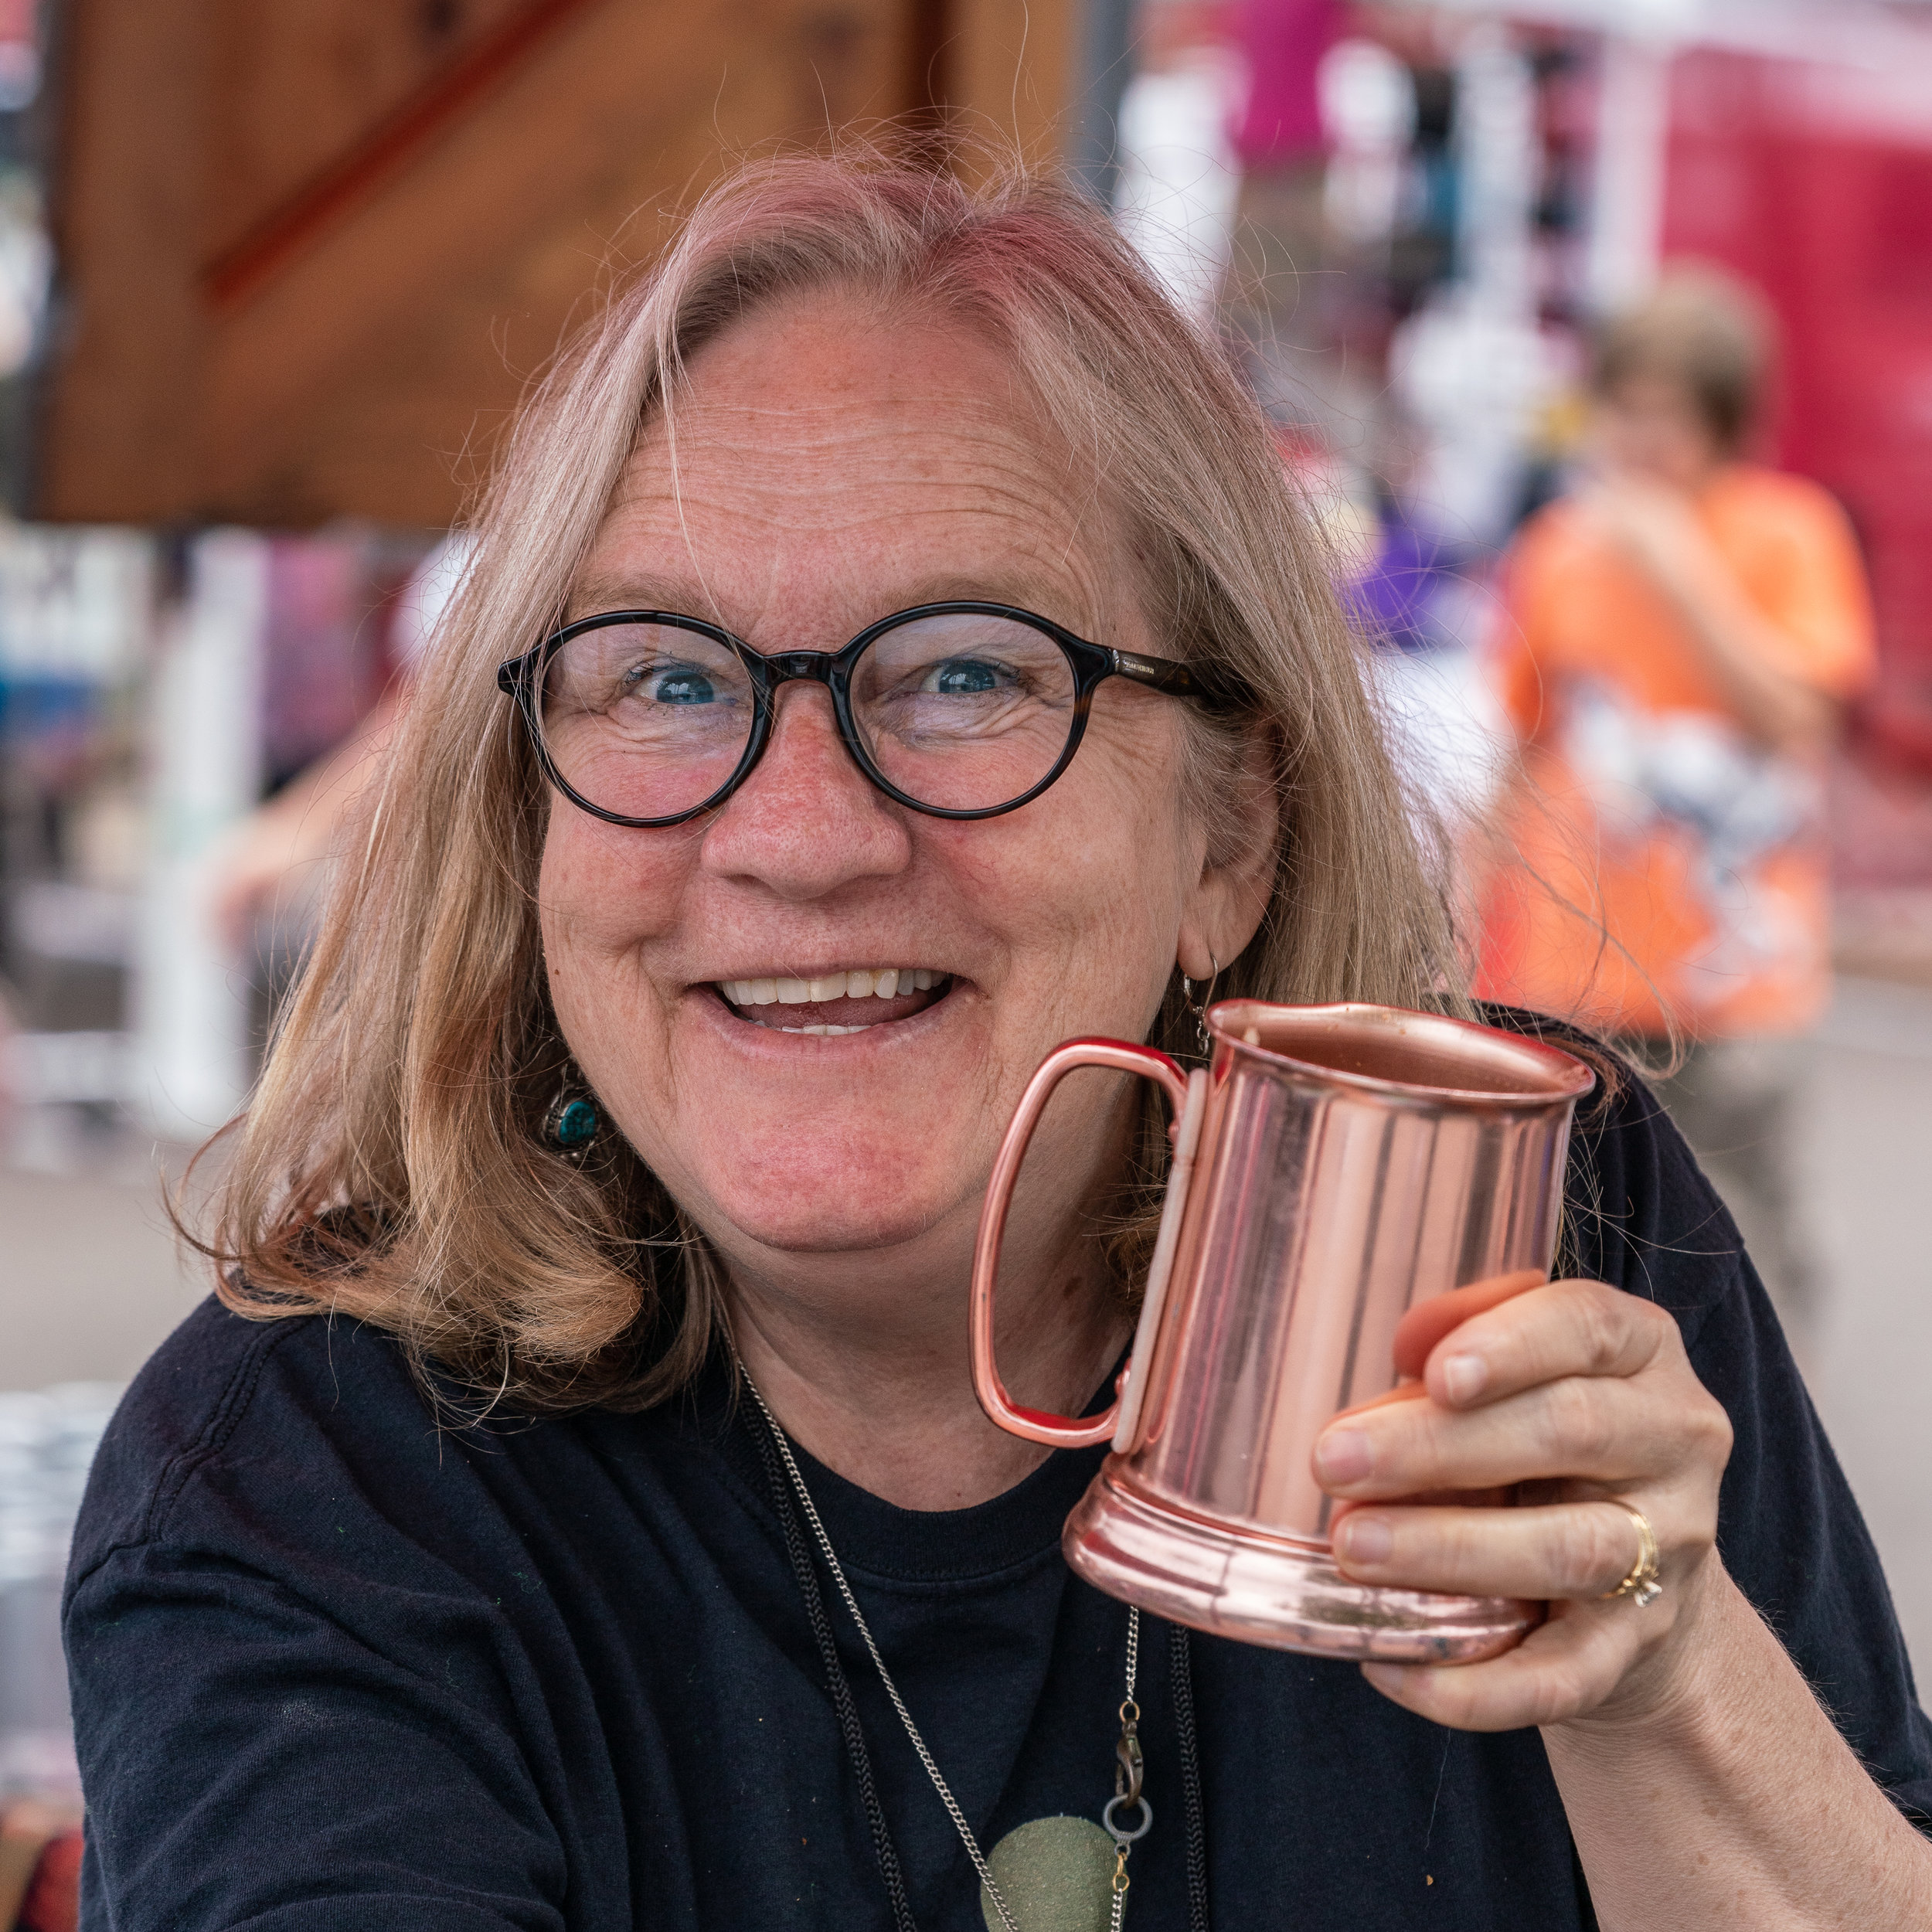  A vendor at Duluth’s Festival of Sail  Canal Park, Duluth 